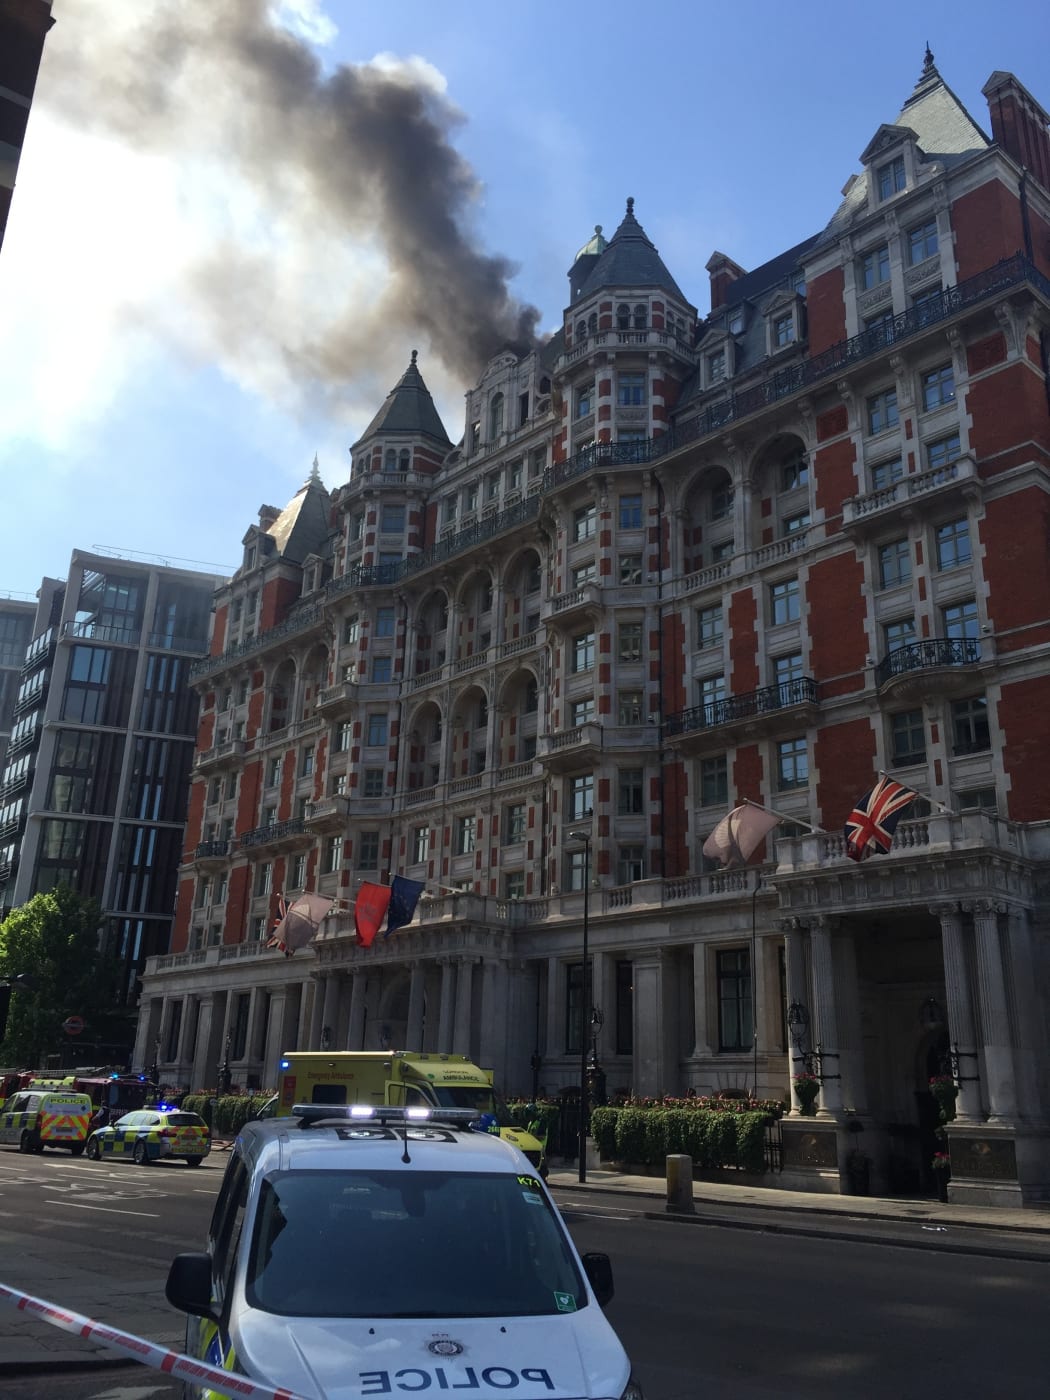 Plumes of black smoke billow as firefighters tackle a blaze at the Mandarin Oriental hotel in central London on June 6, 2018.